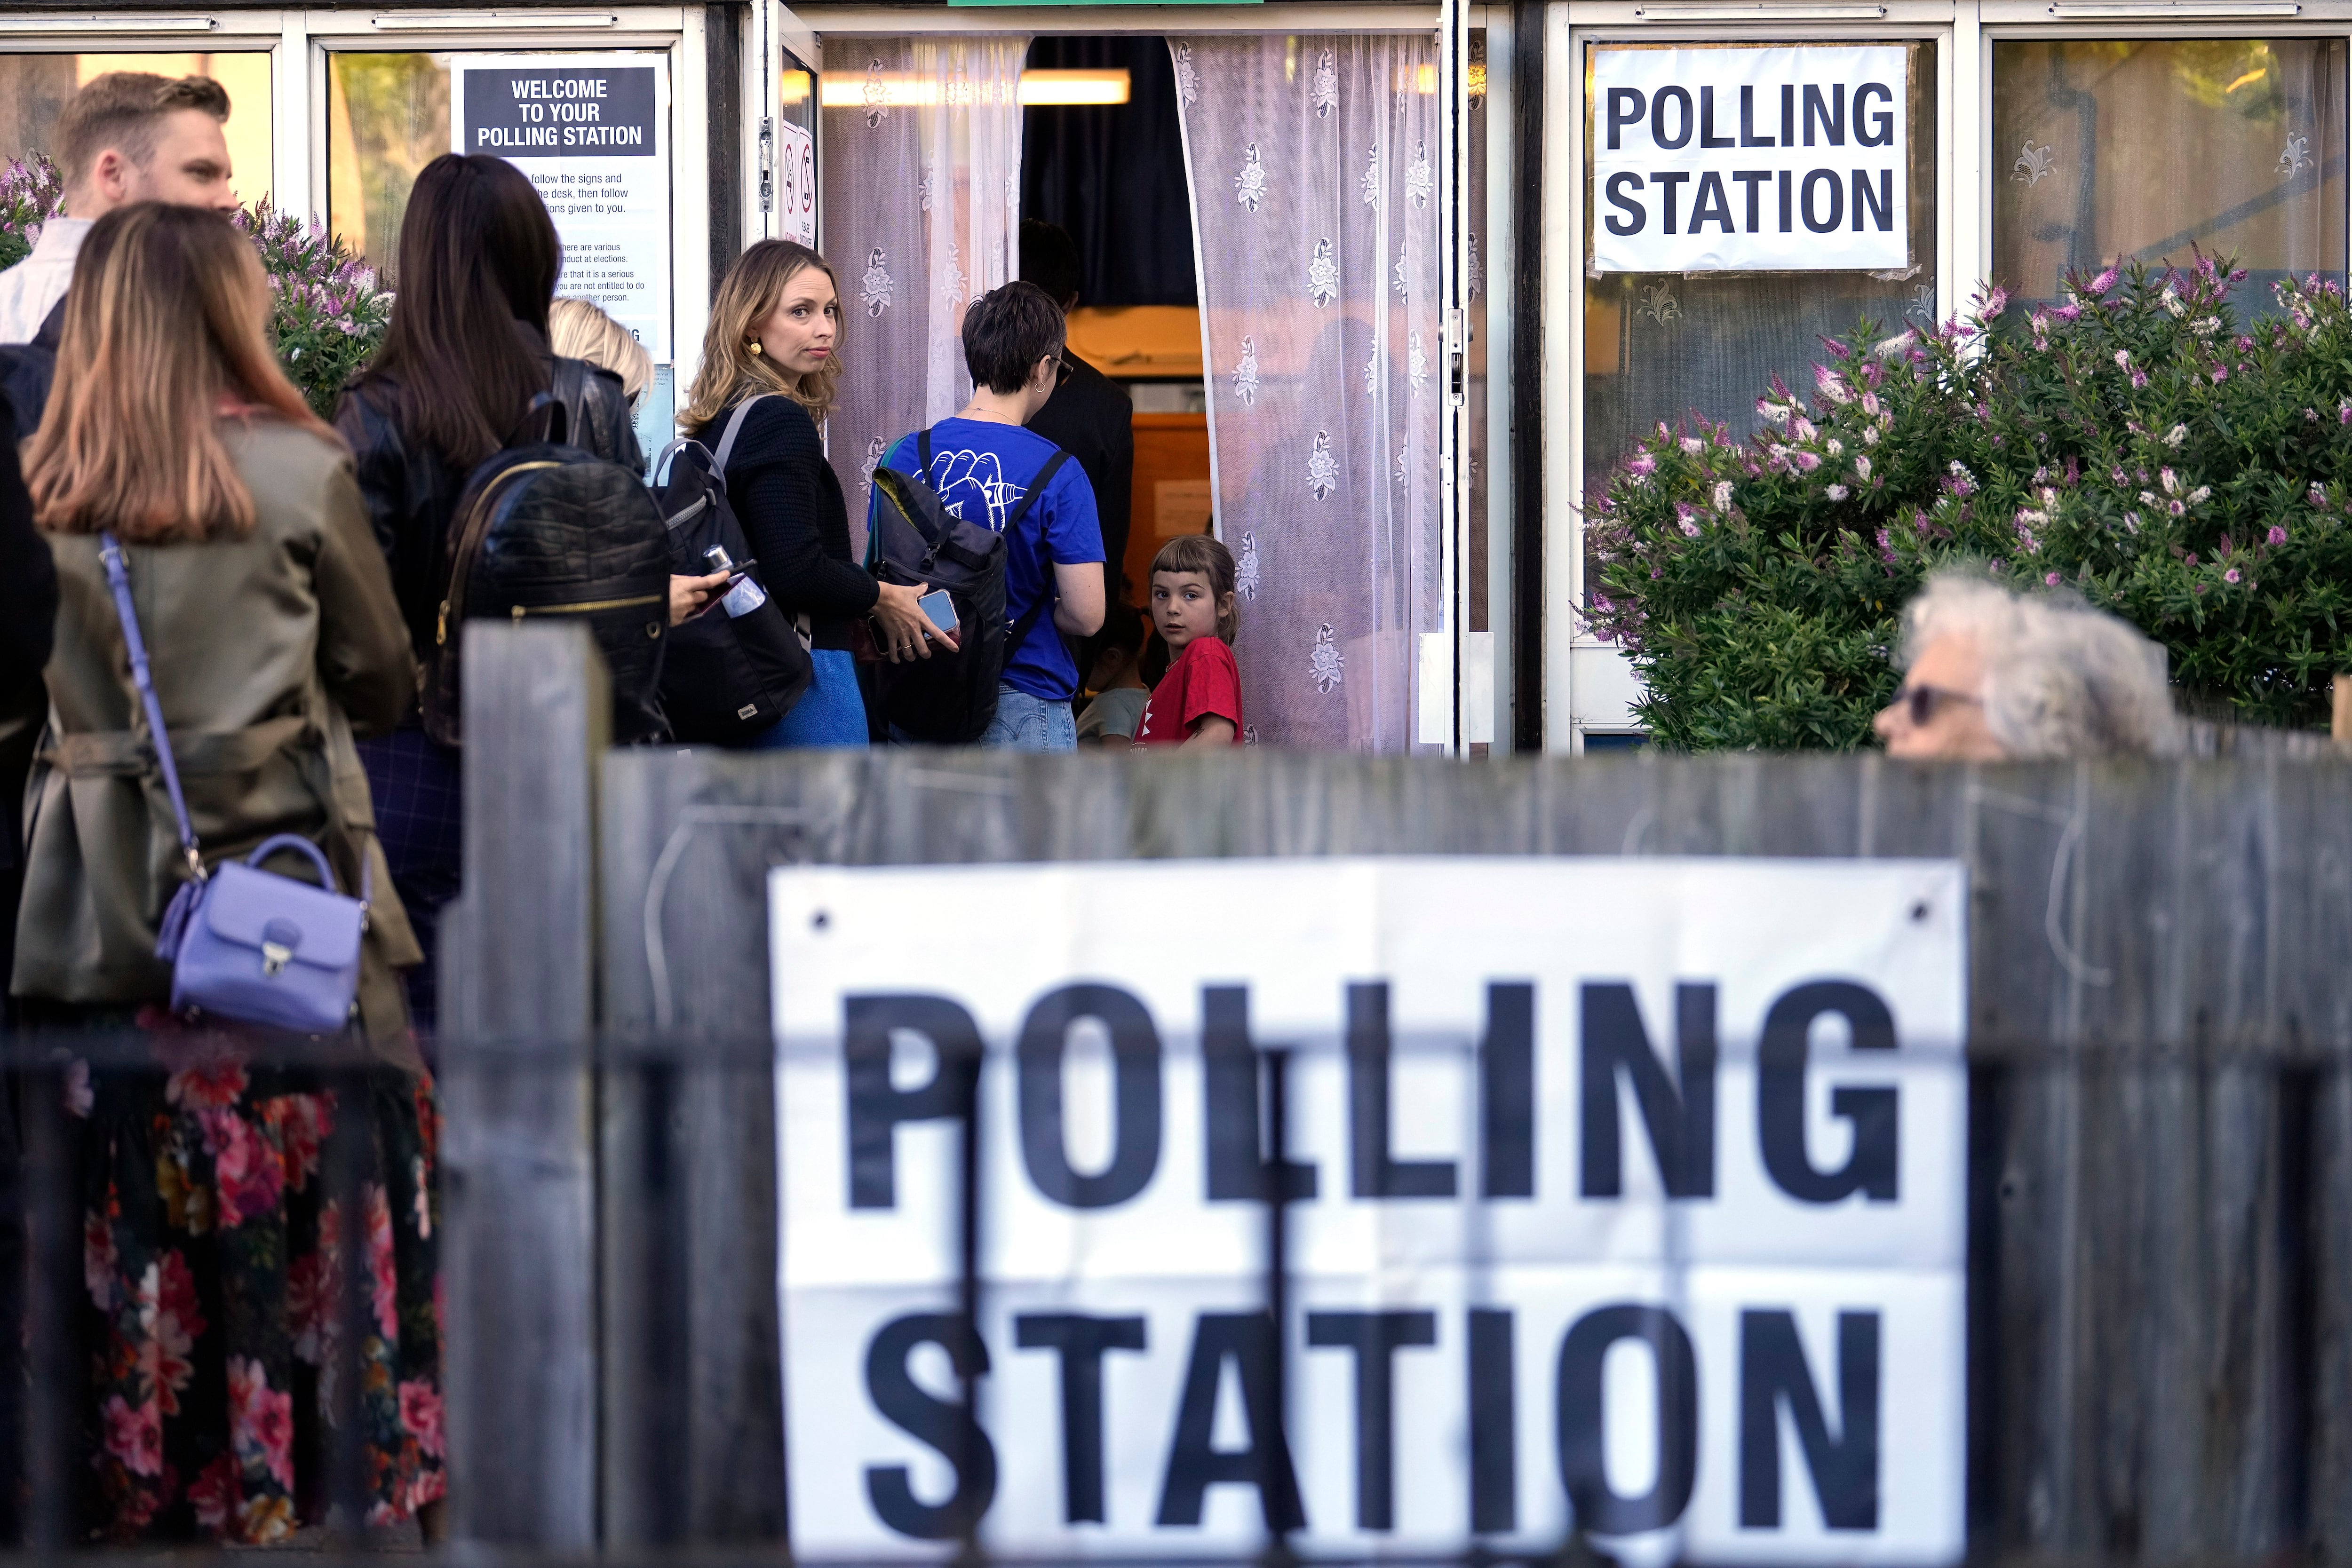 People queue at a polling station in London, Thursday, July 4, 2024. Voters in the U.K. are casting their ballots in a national election to choose the 650 lawmakers who will sit in Parliament for the next five years. Outgoing Prime Minister Rishi Sunak surprised his own party on May 22 when he called the election. (AP Photo/Vadim Ghirda)